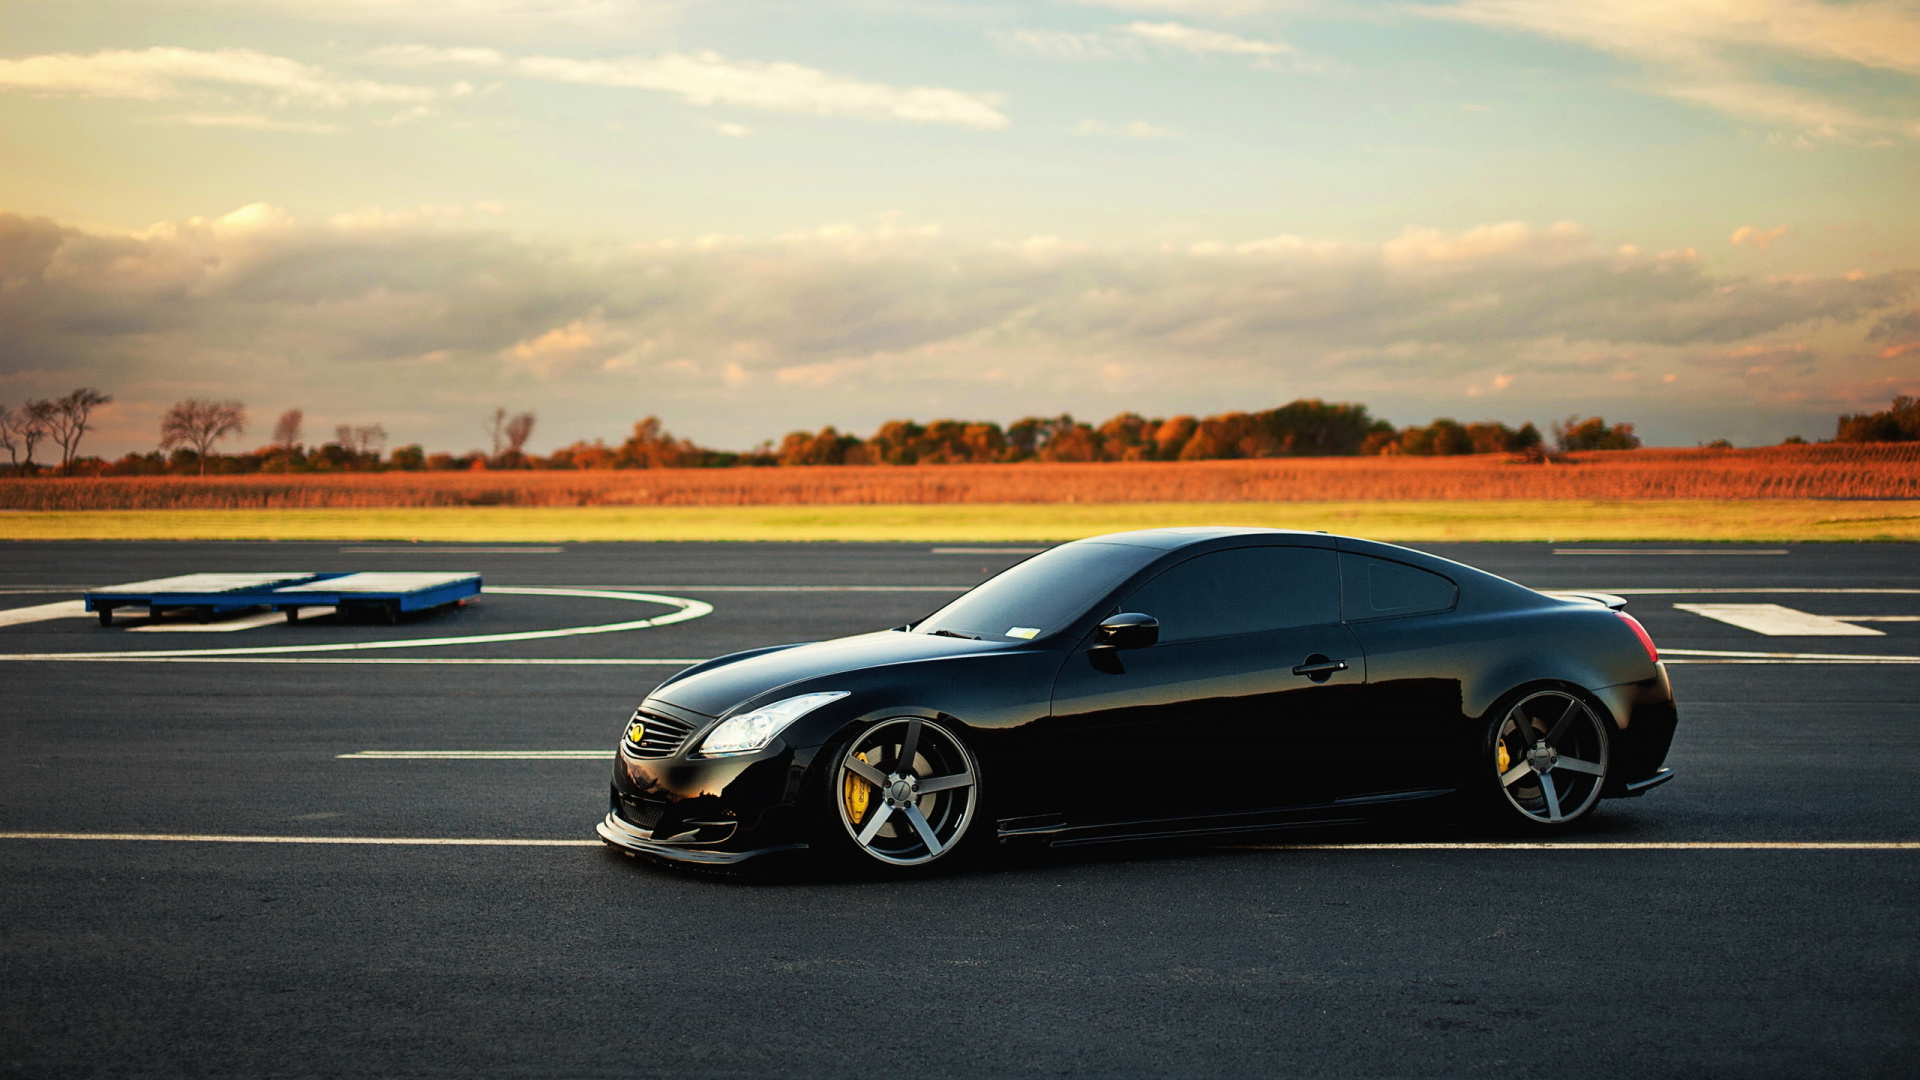 Black Coupe on Gray Asphalt Road During Daytime. Wallpaper in 1920x1080 Resolution